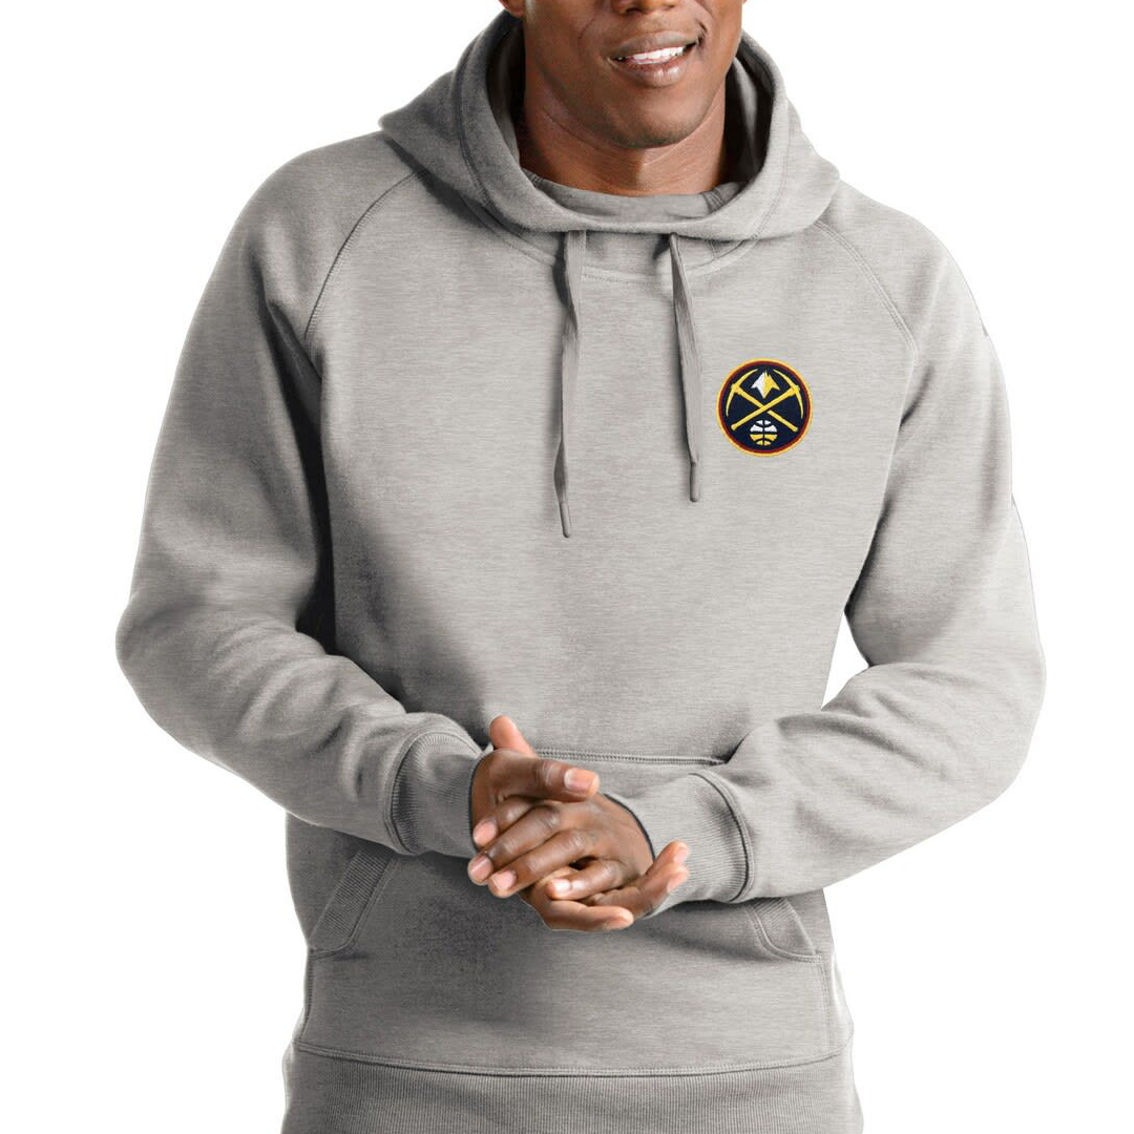 Antigua Men's Heathered Gray Denver Nuggets Victory Pullover Hoodie - Image 2 of 2